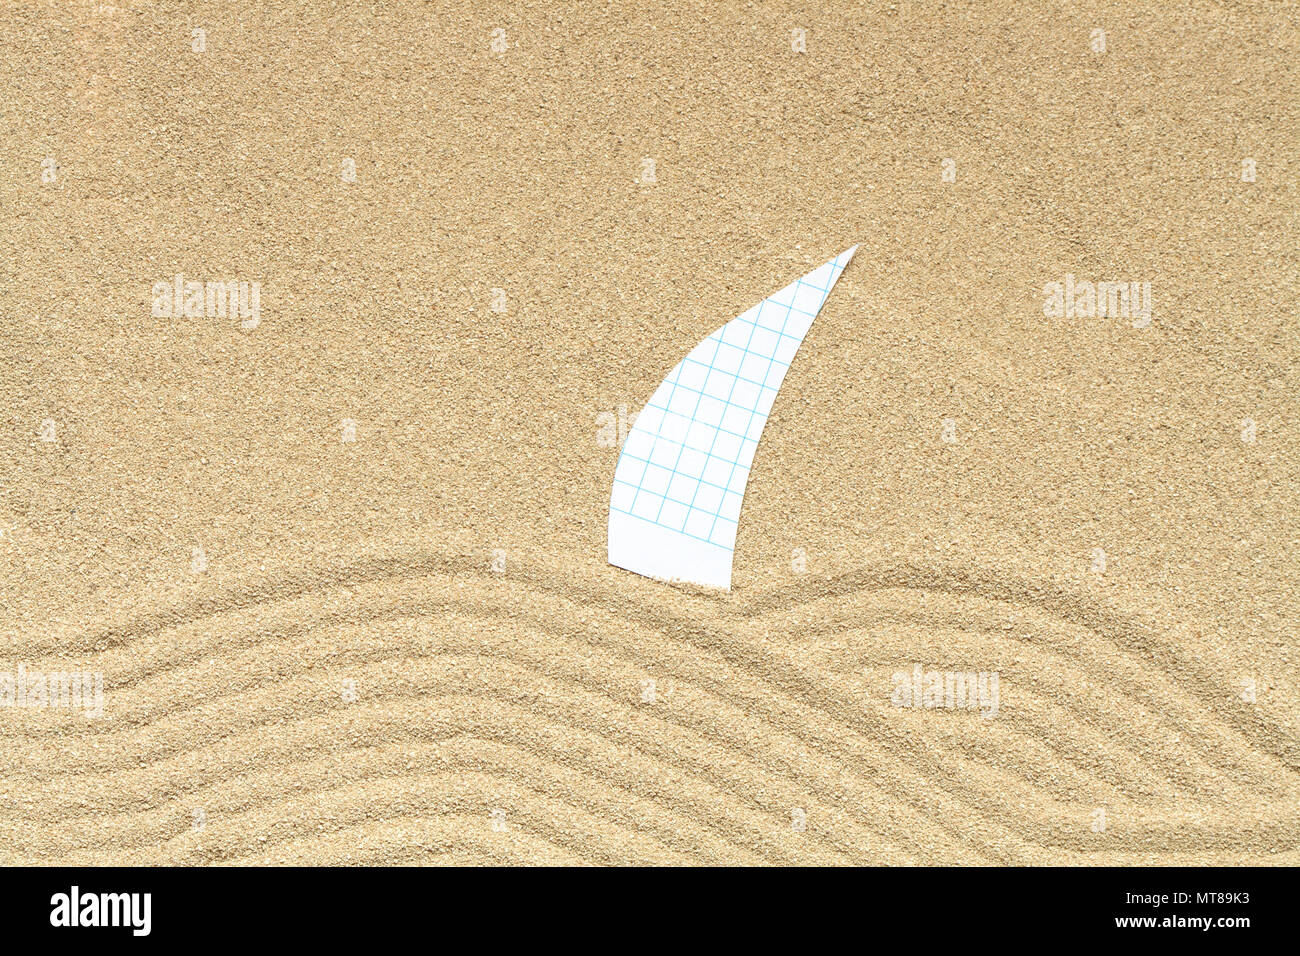 Paper sail lying on sand background with drawing waves Stock Photo